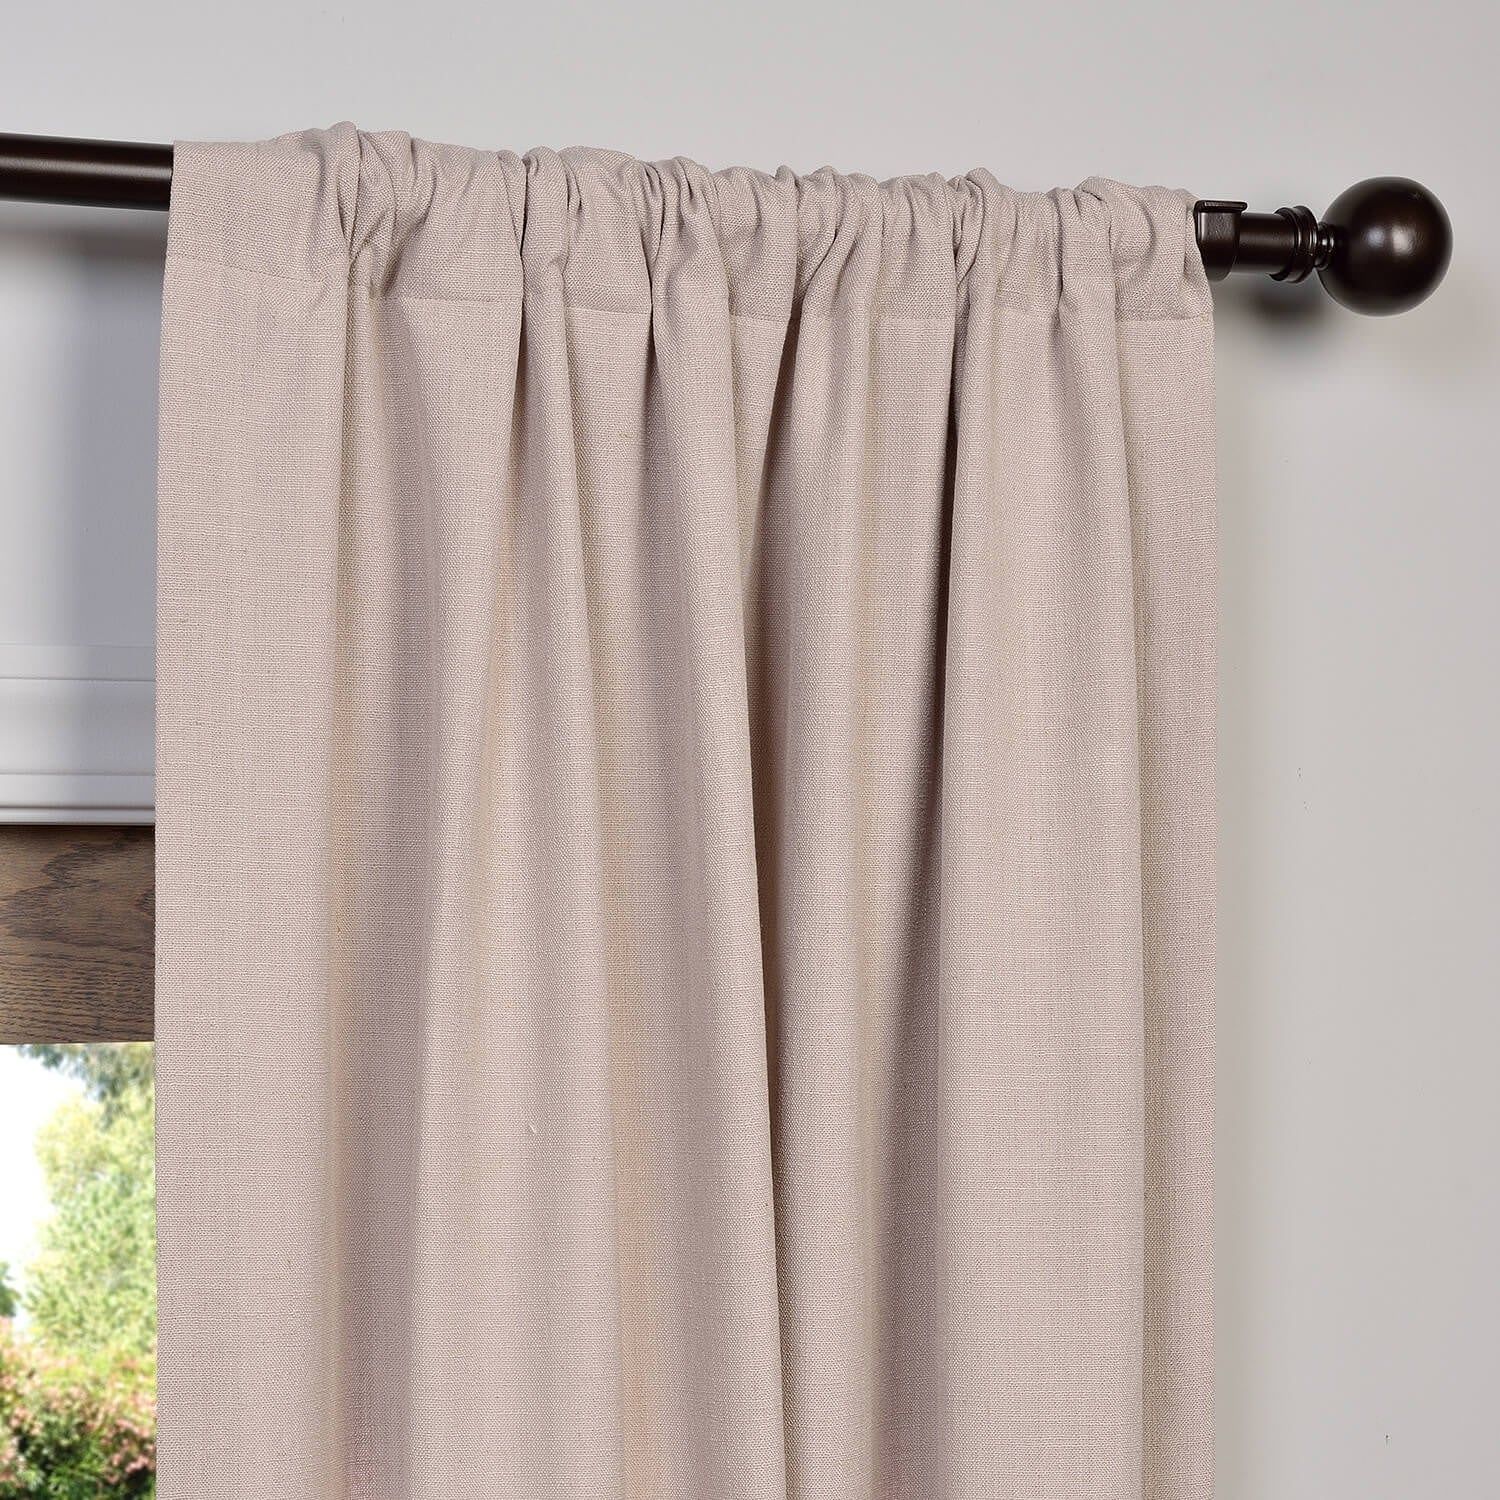 Heavy Faux Linen Single Curtain Panel With Regard To Heavy Faux Linen Single Curtain Panels (Photo 2 of 20)